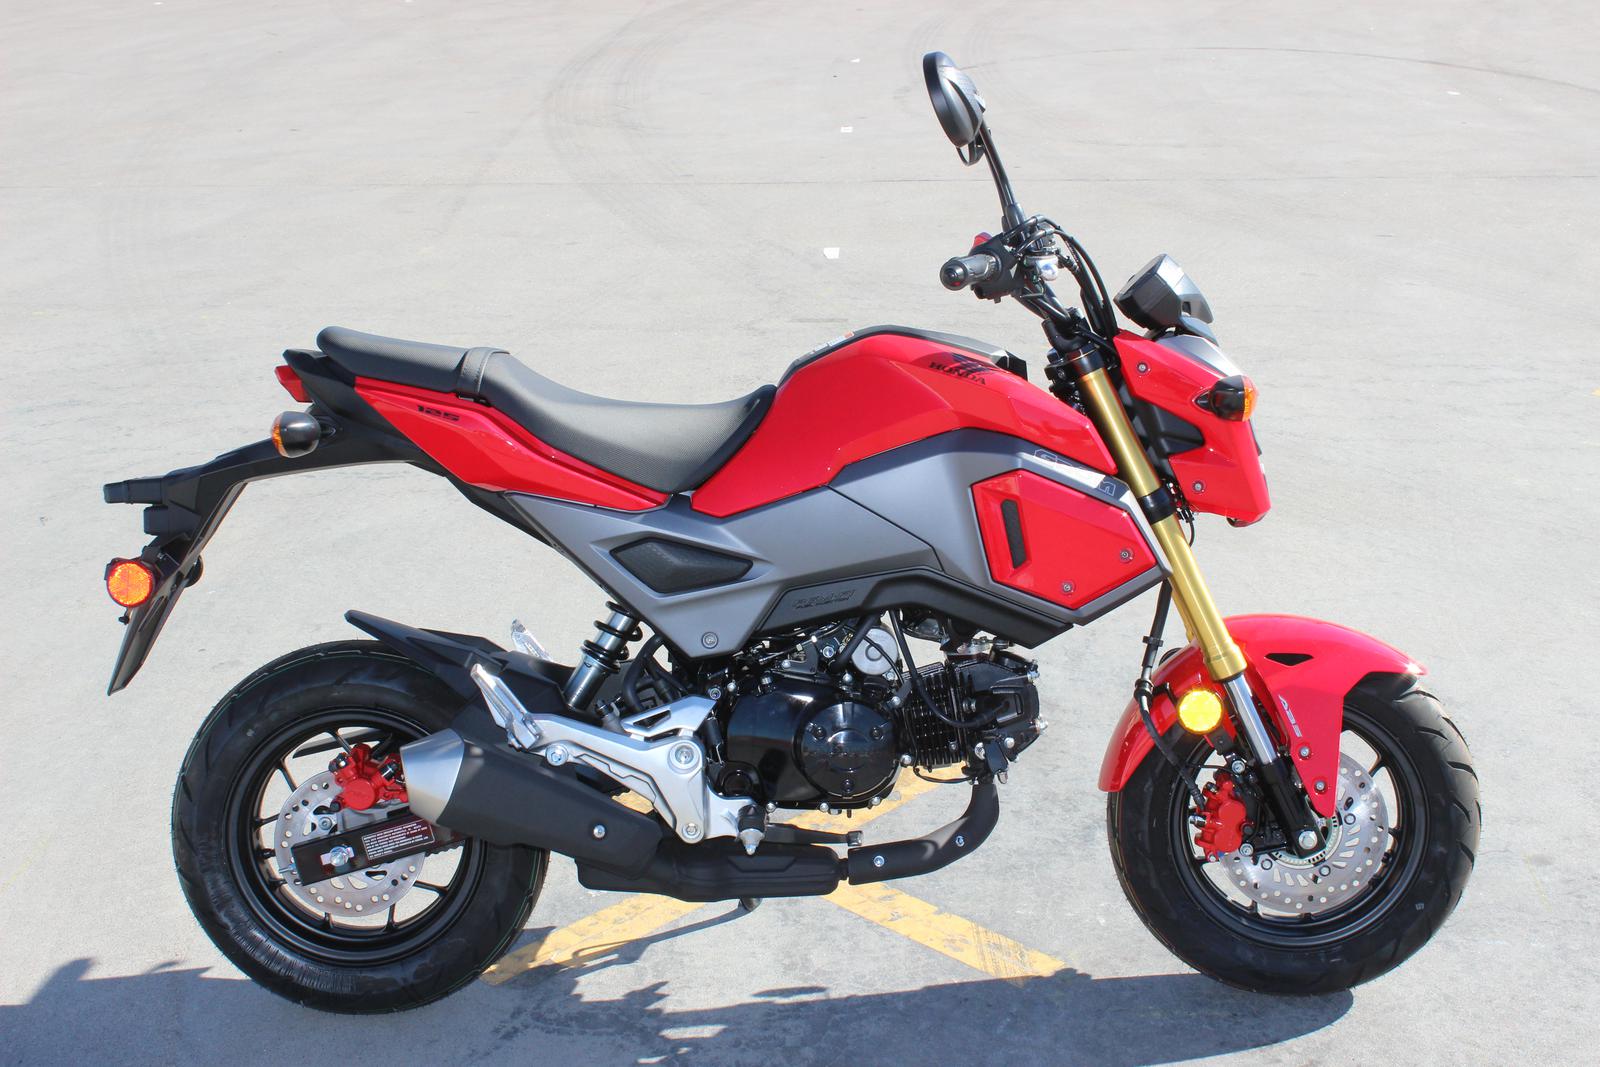 How Fast Does a Honda Grom Go?